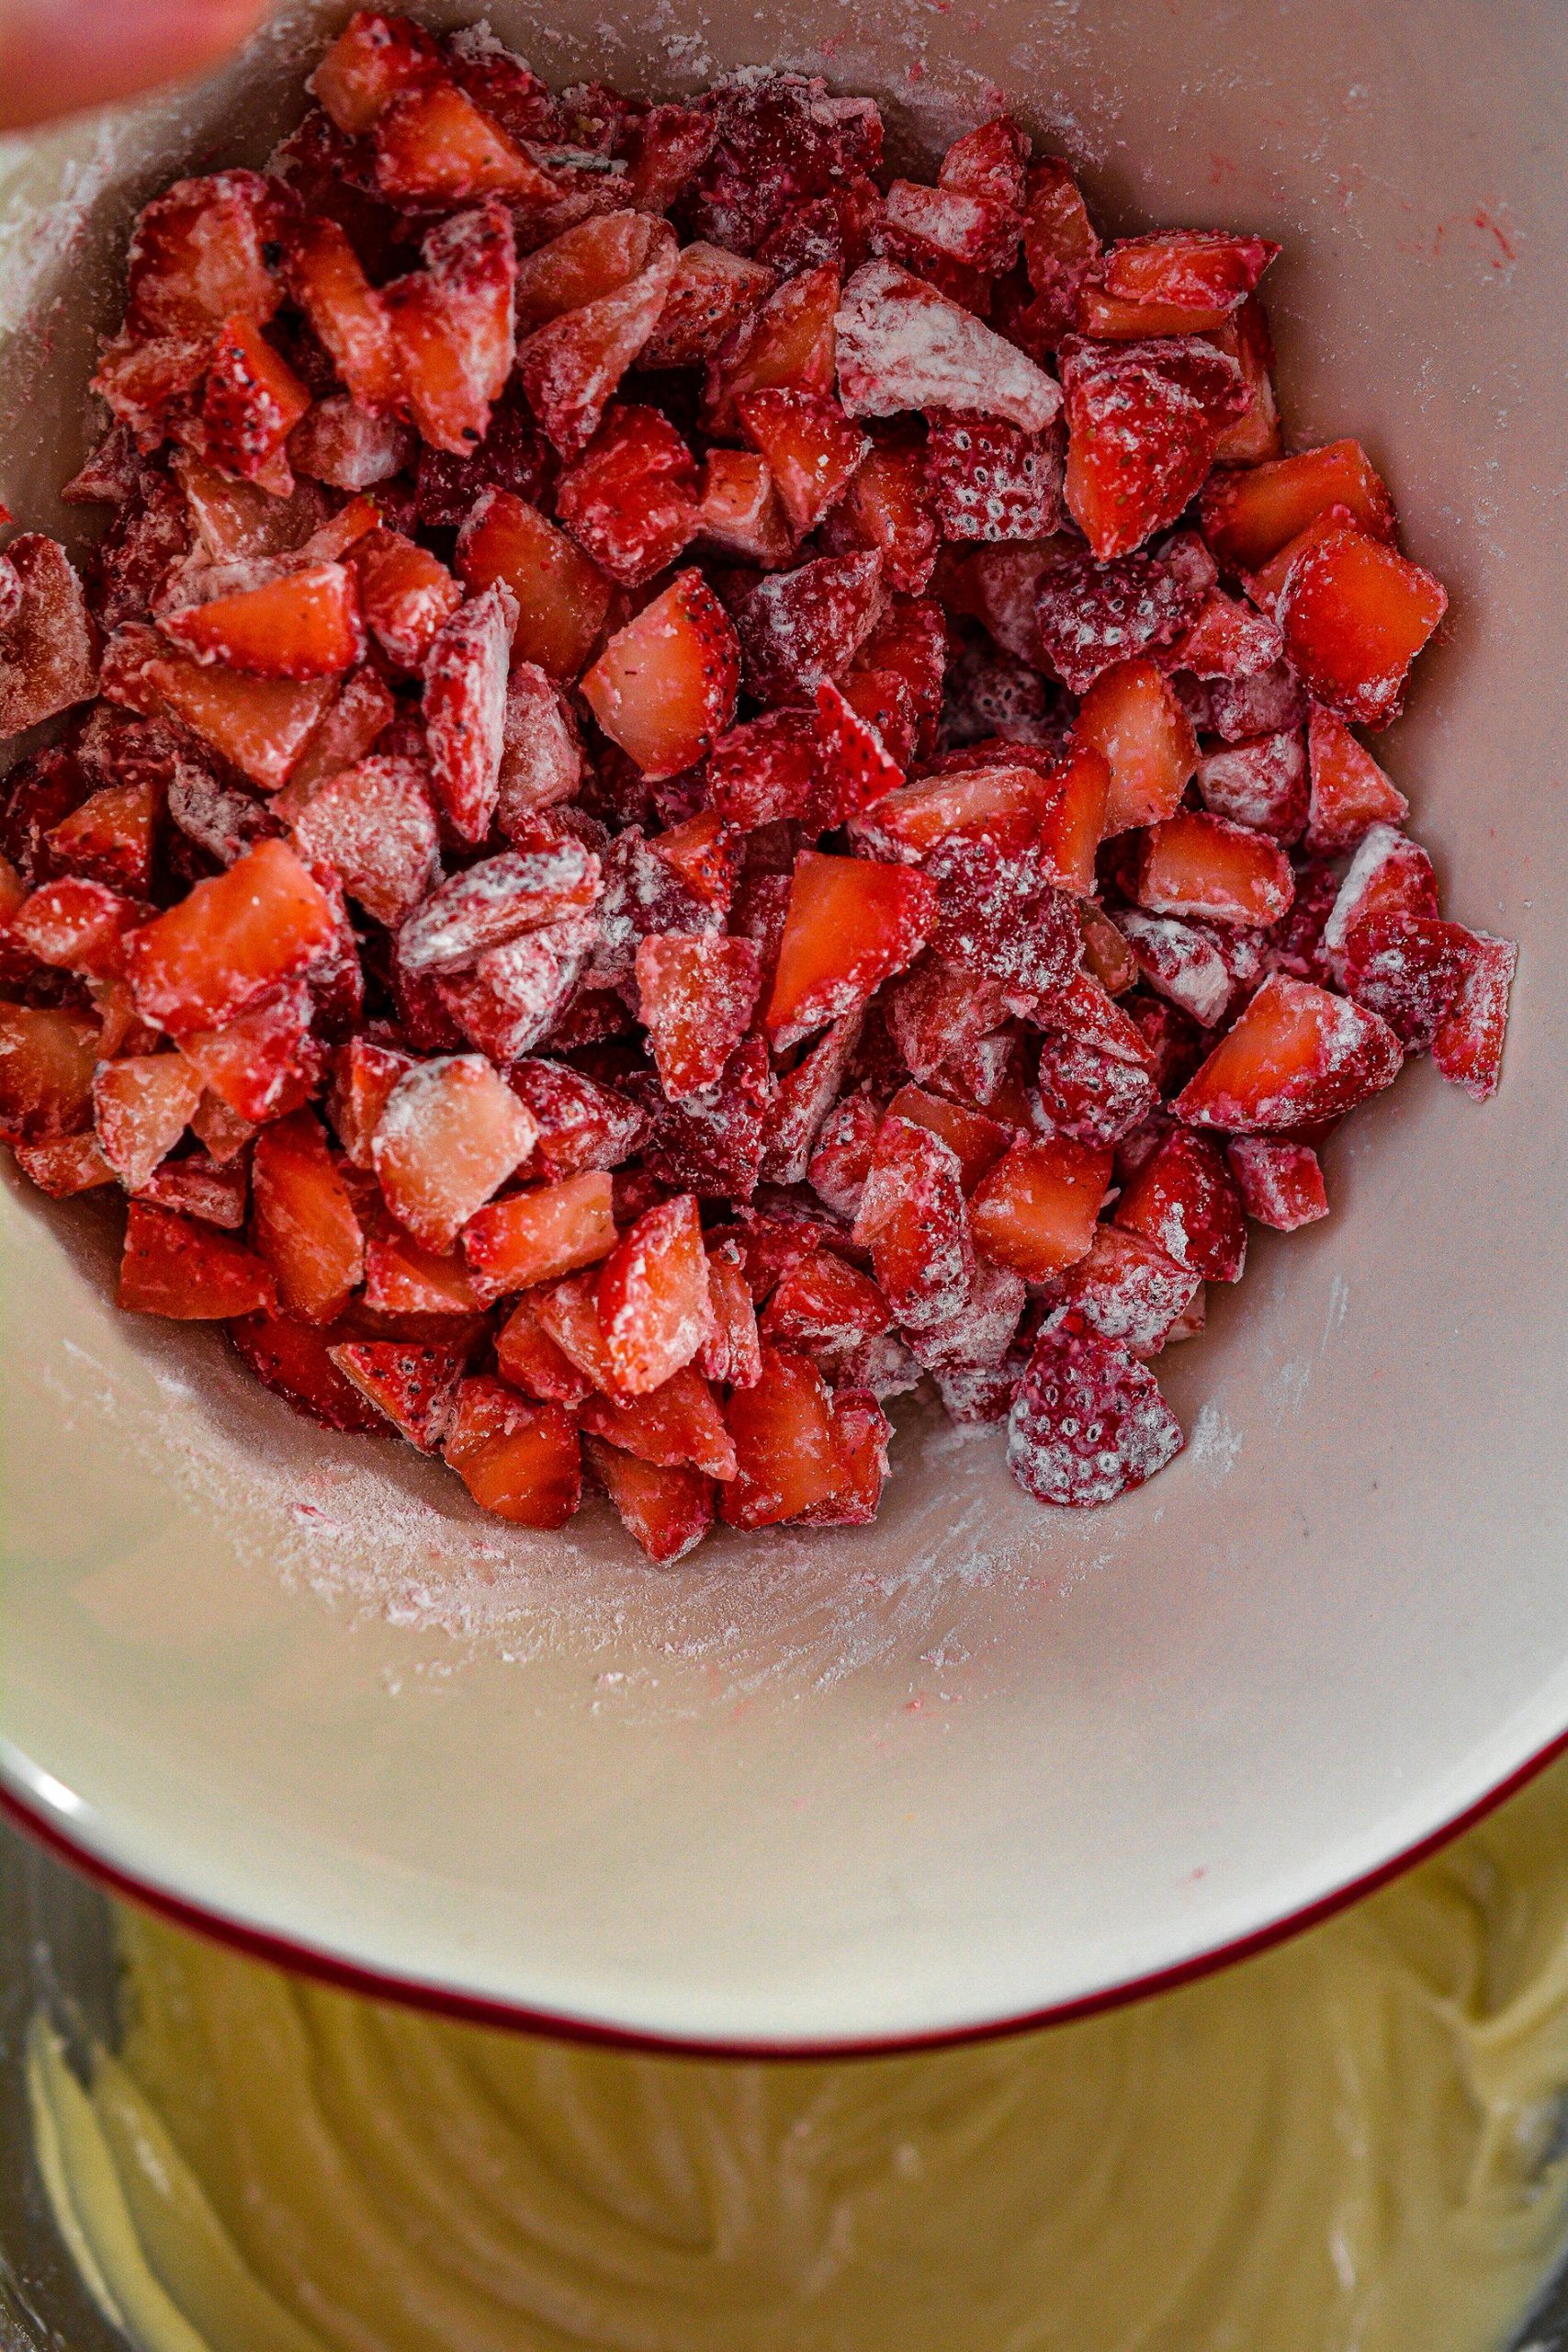 In a bowl, toss the 2 cups of diced strawberries in the 2 tbsp flour, and then fold them into the bread batter.